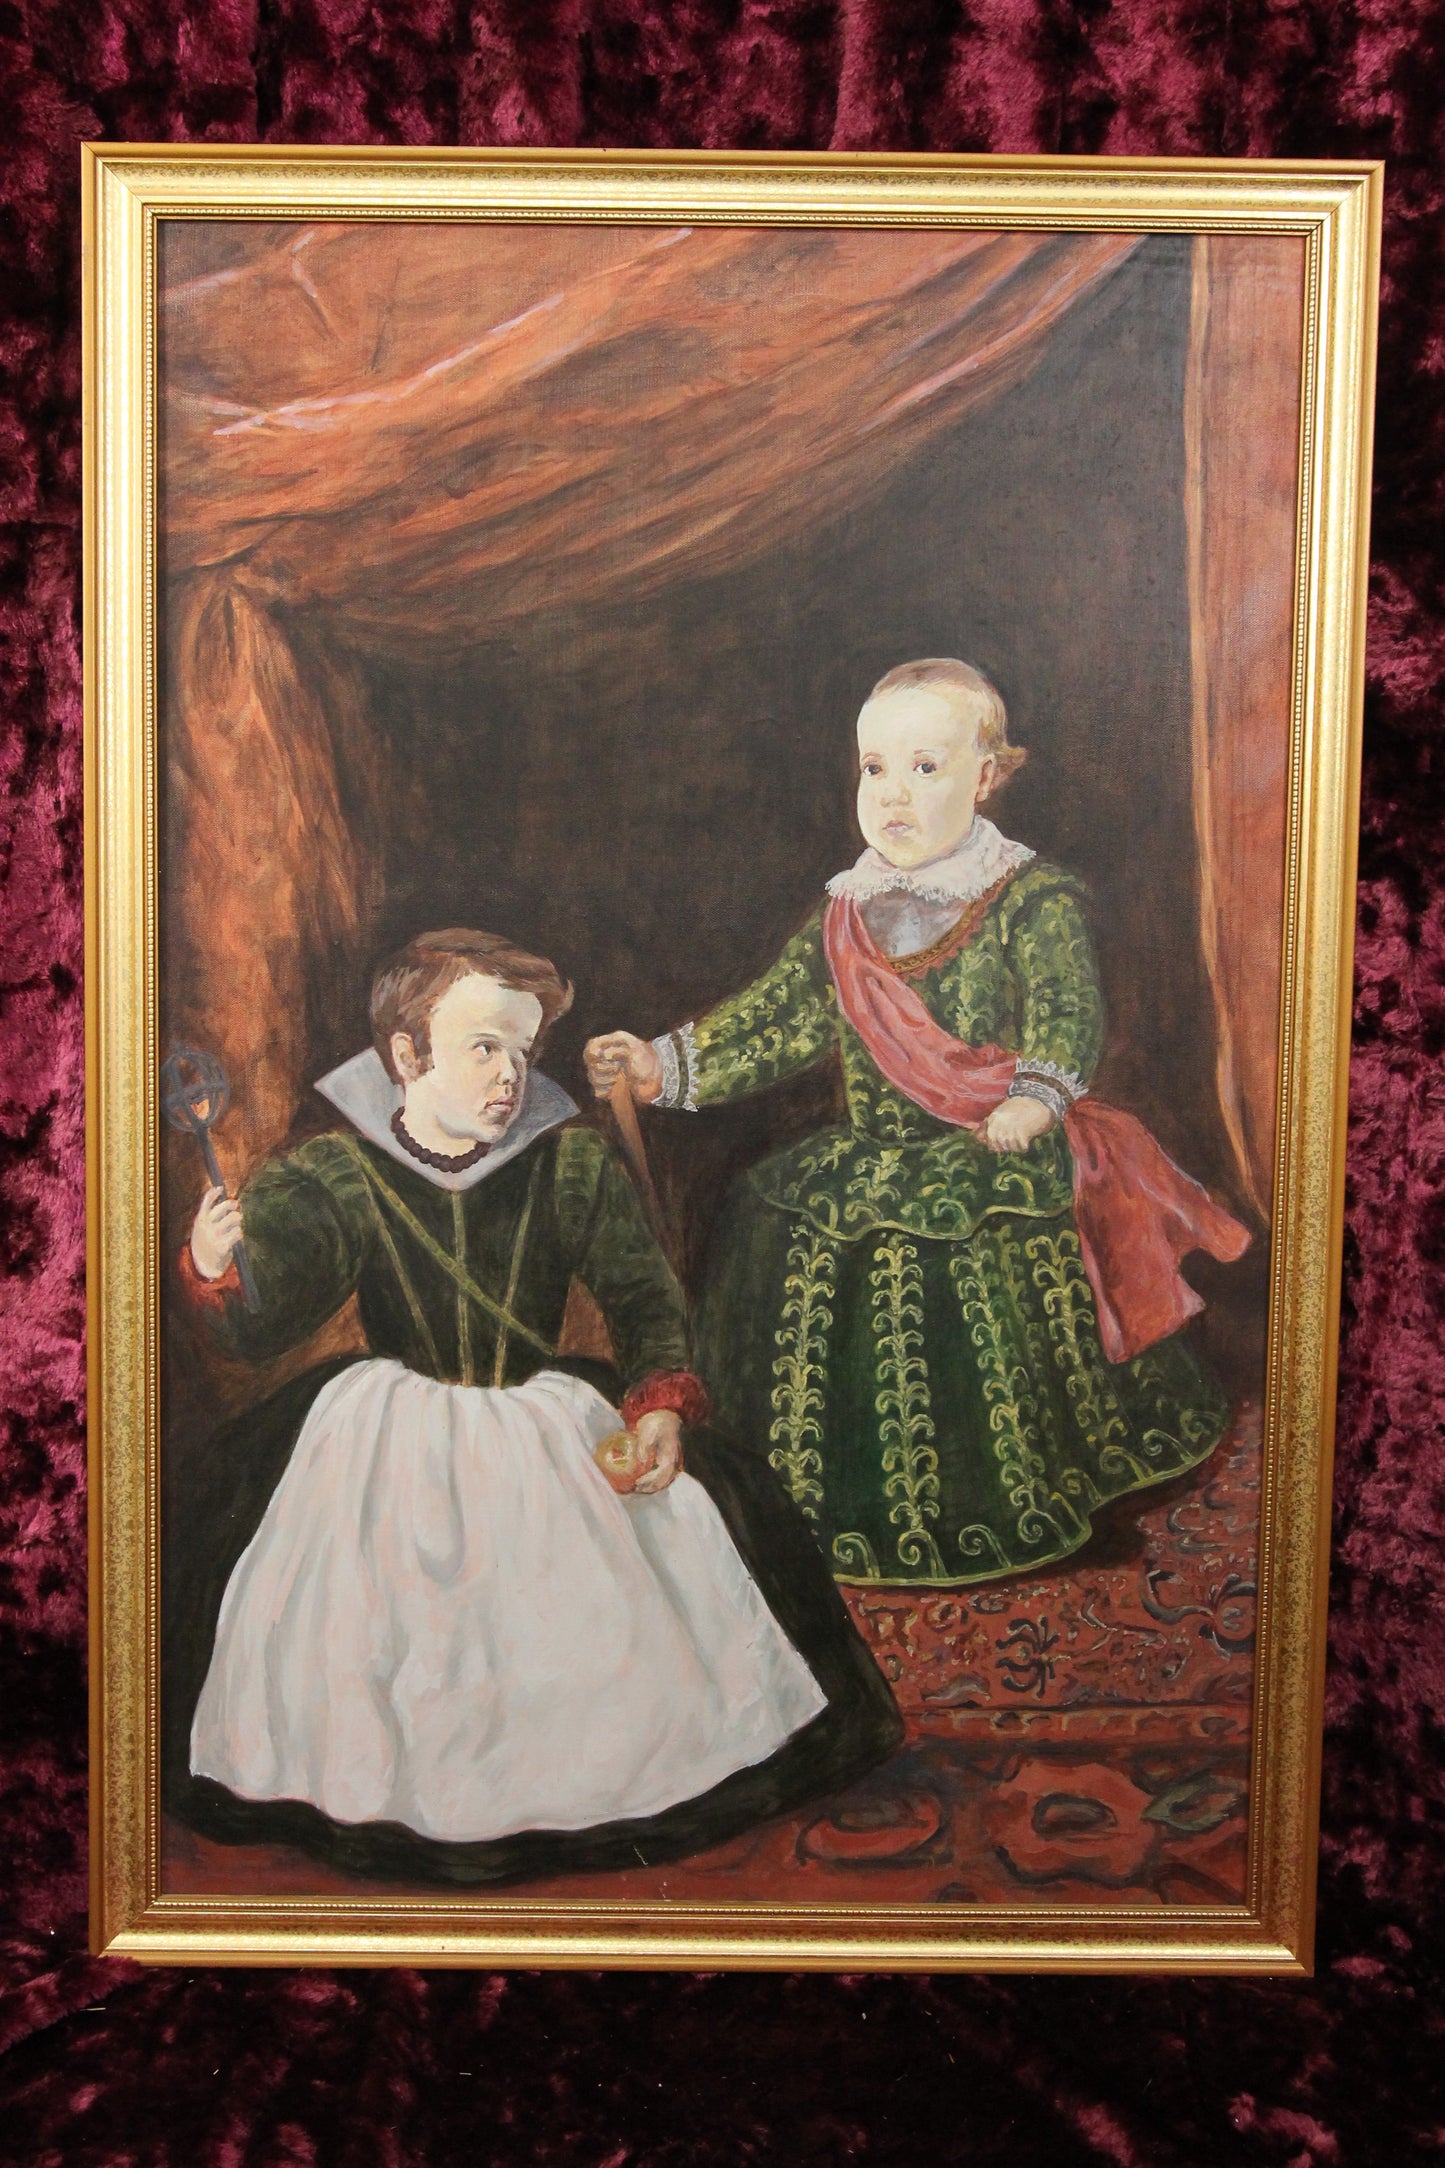 Oil on Canvas Painting "Prince Balthasar Charles with a Dwarf," After Velázquez